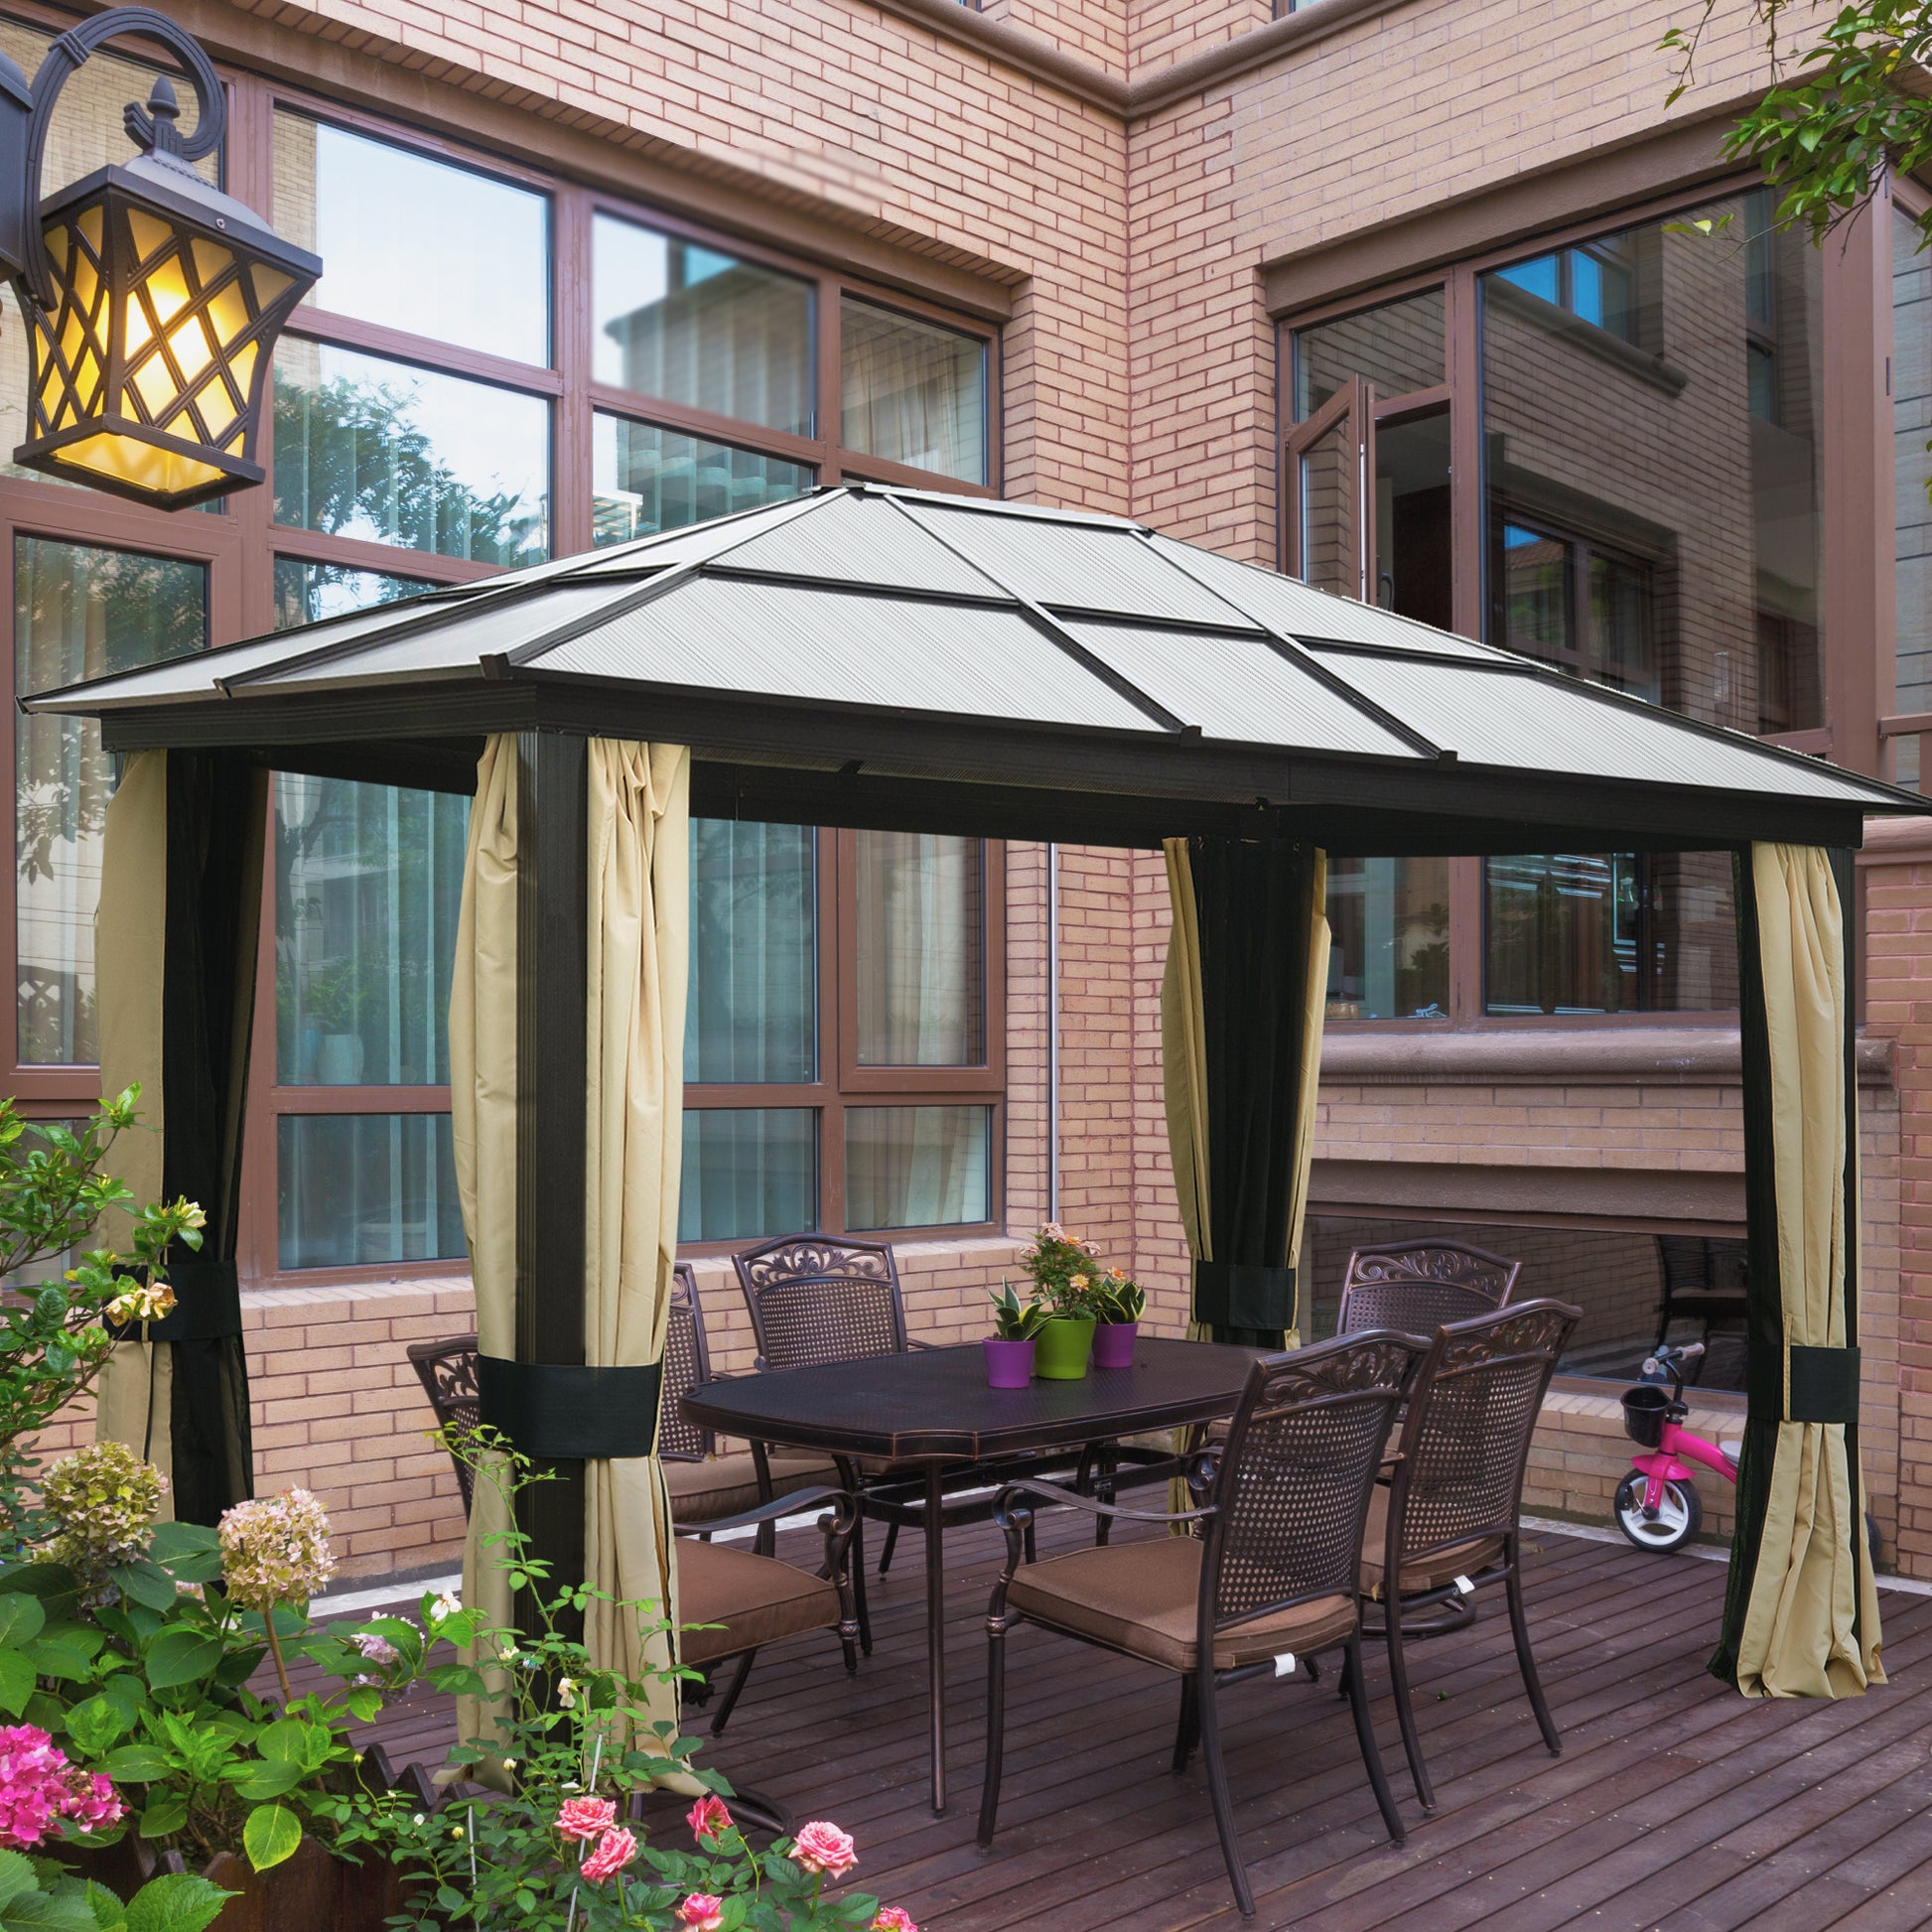 Outsunny 3.6 x 3(m) Hardtop Gazebo Canopy with Polycarbonate Roof and Aluminium Frame, Garden Pavilion with Mosquito Netting and Curtains, Brown - OutdoorBox